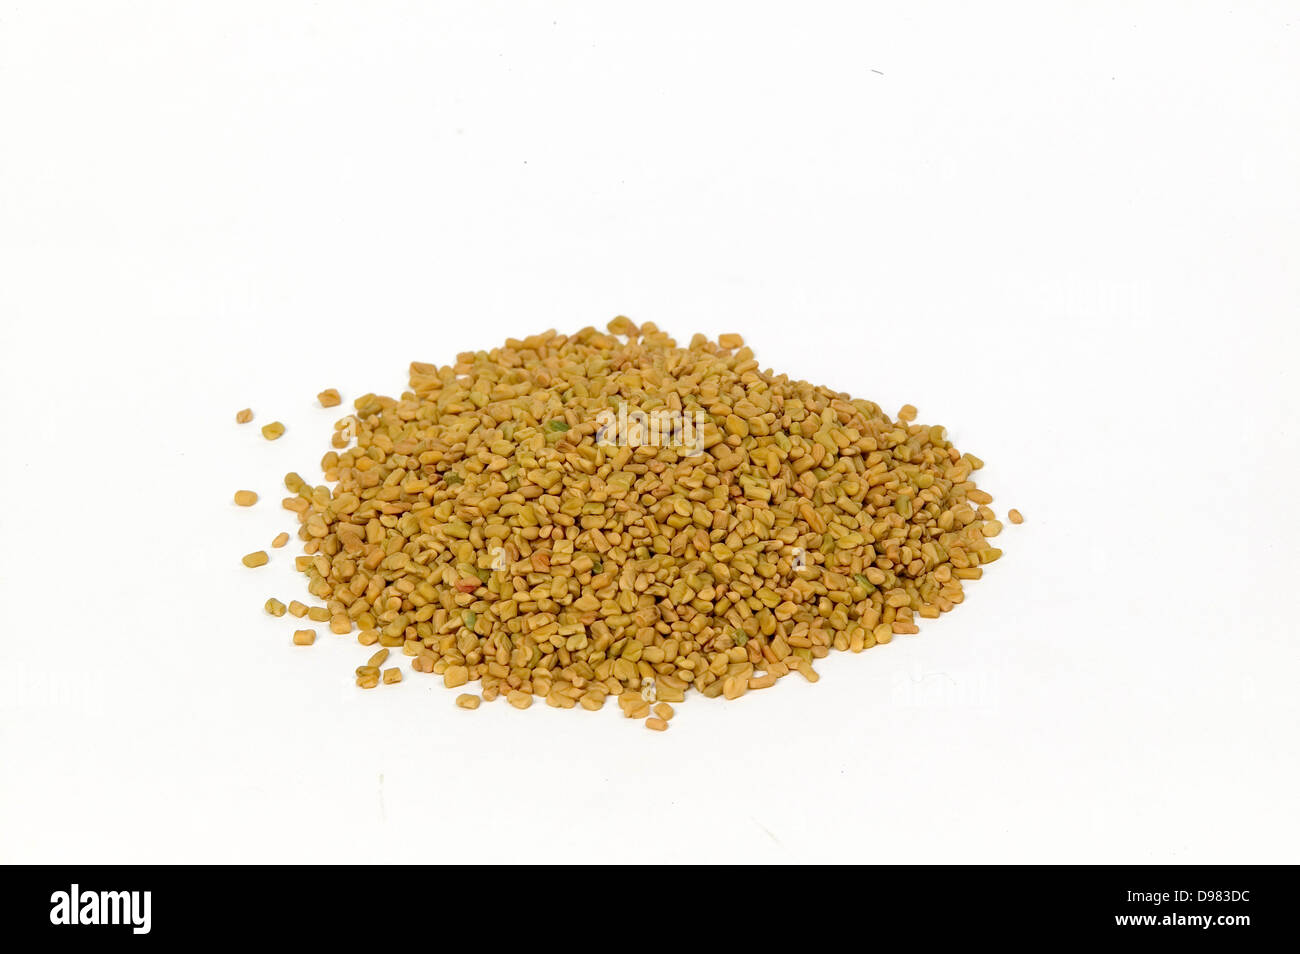 A pile of fenugreek seeds on  a white background. Stock Photo